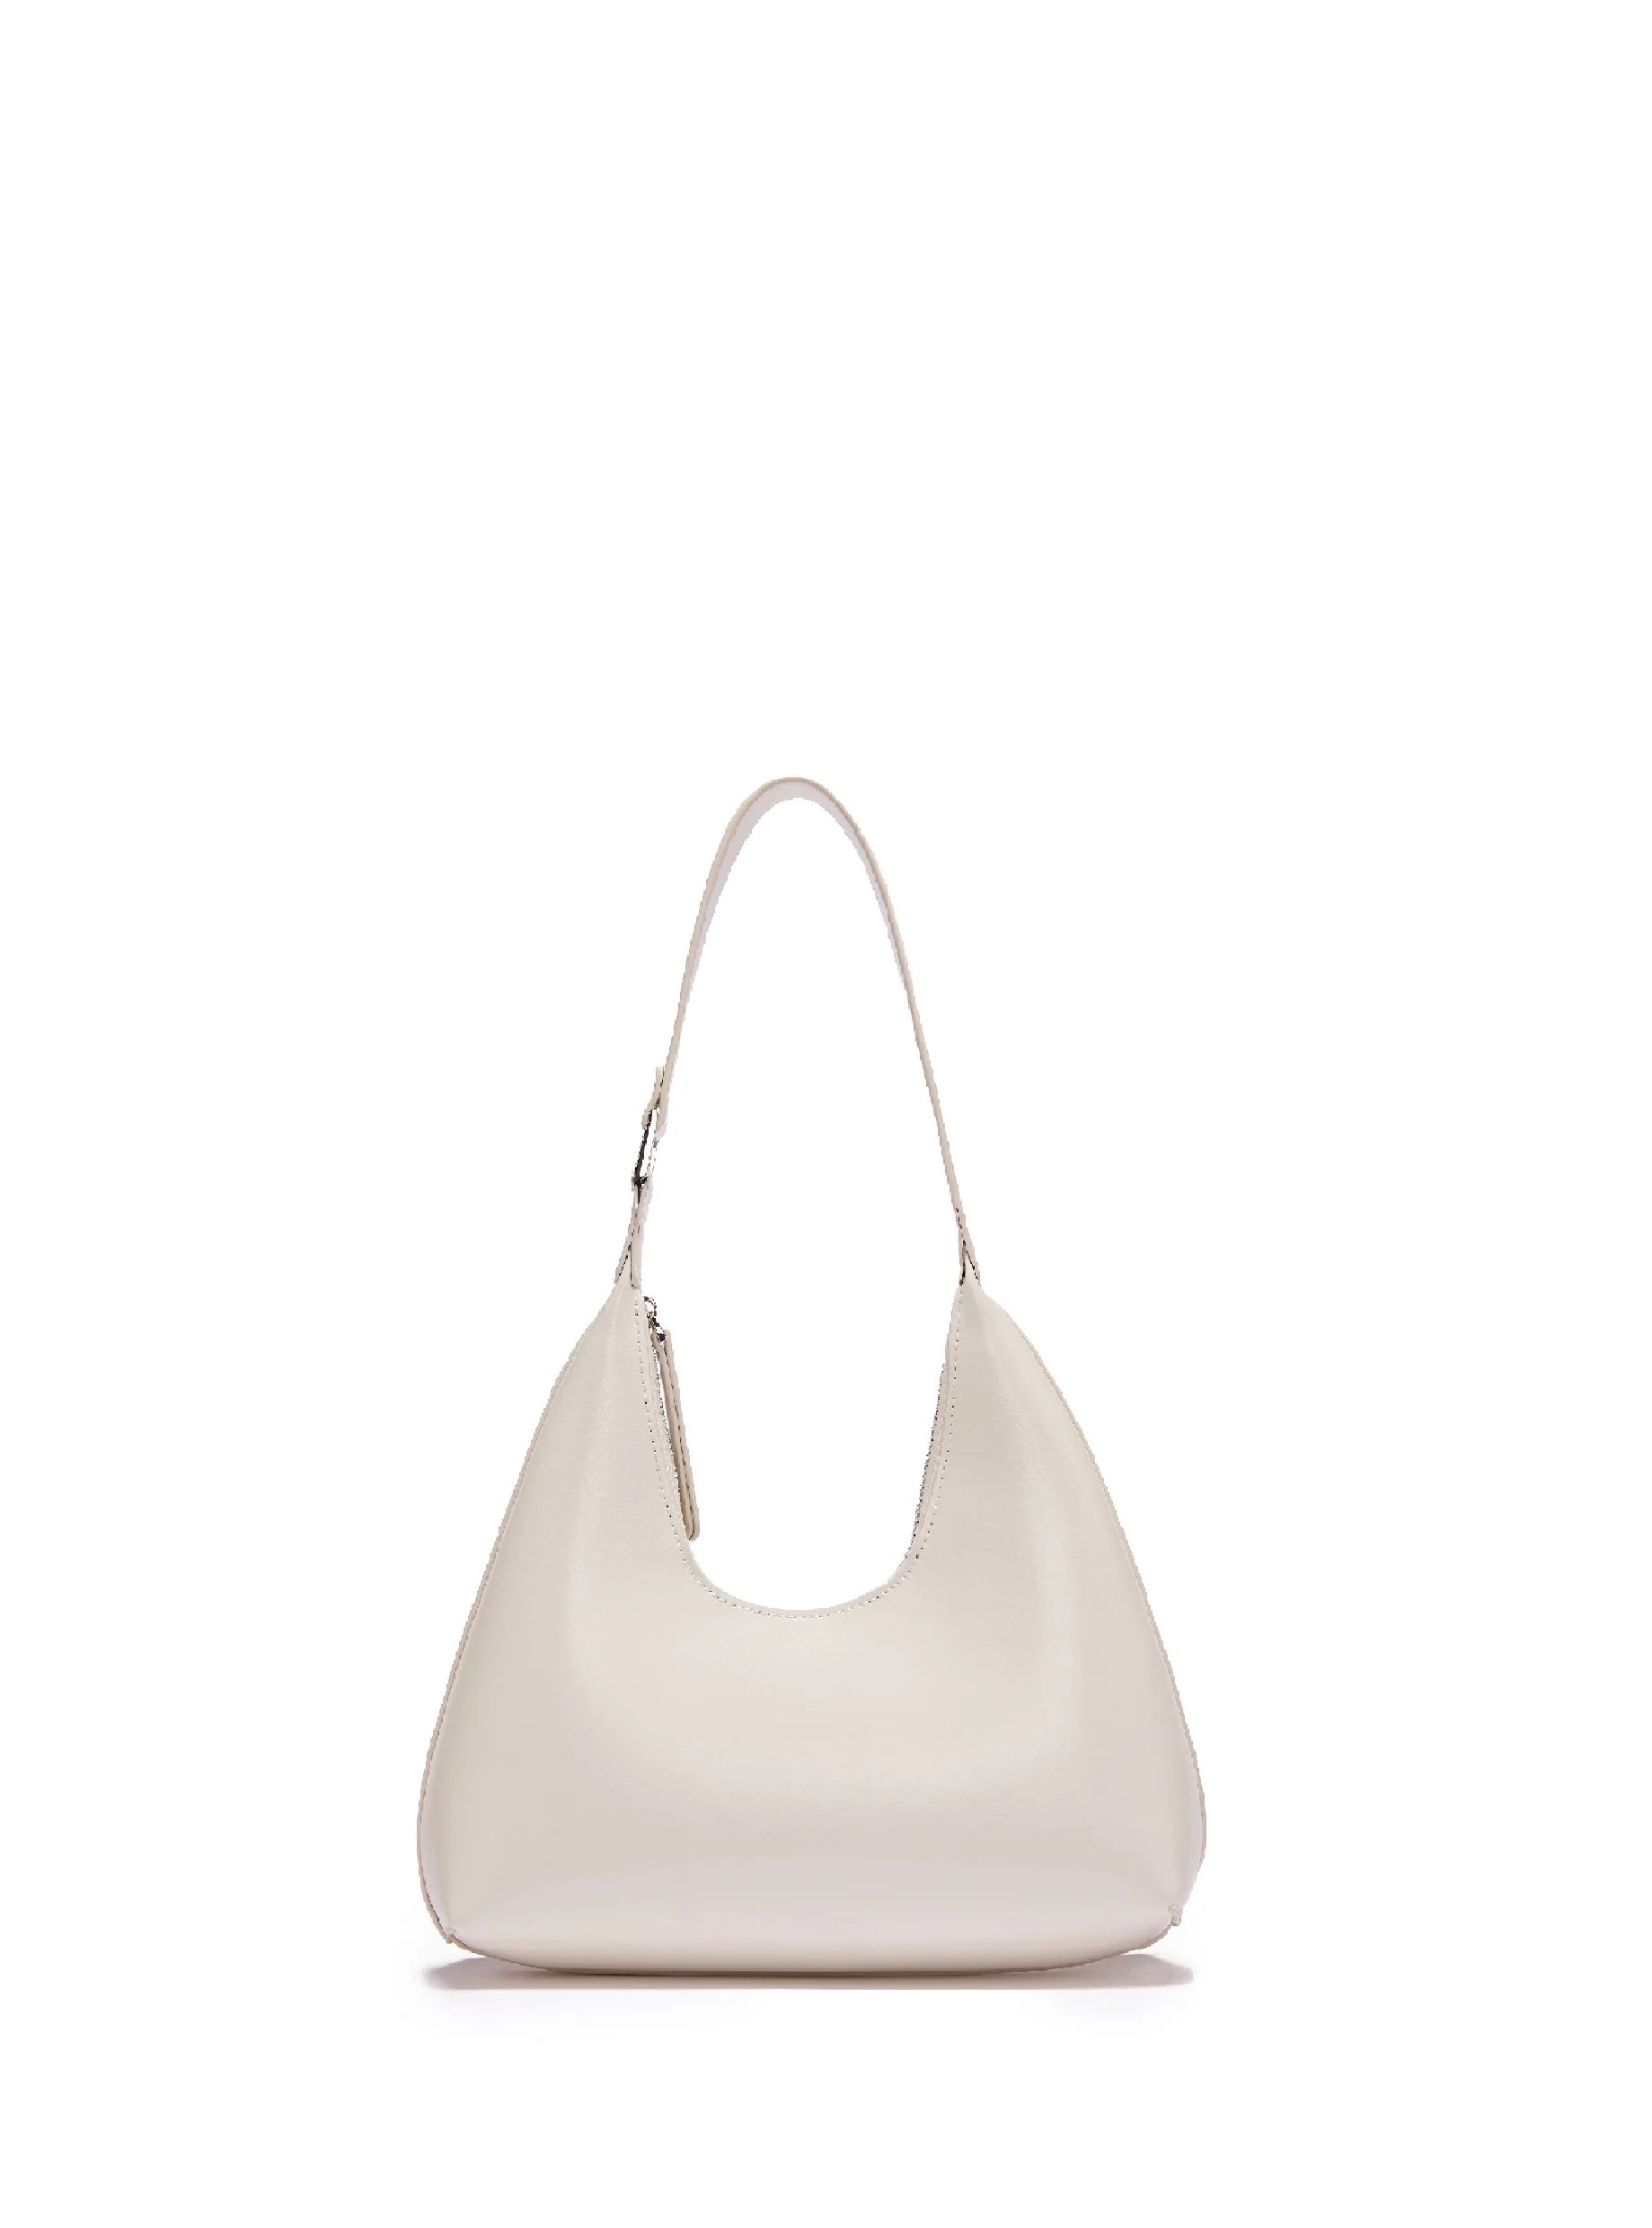 Alexia Bag in Smooth Leather, Beige | Bob Ore Blue Collection